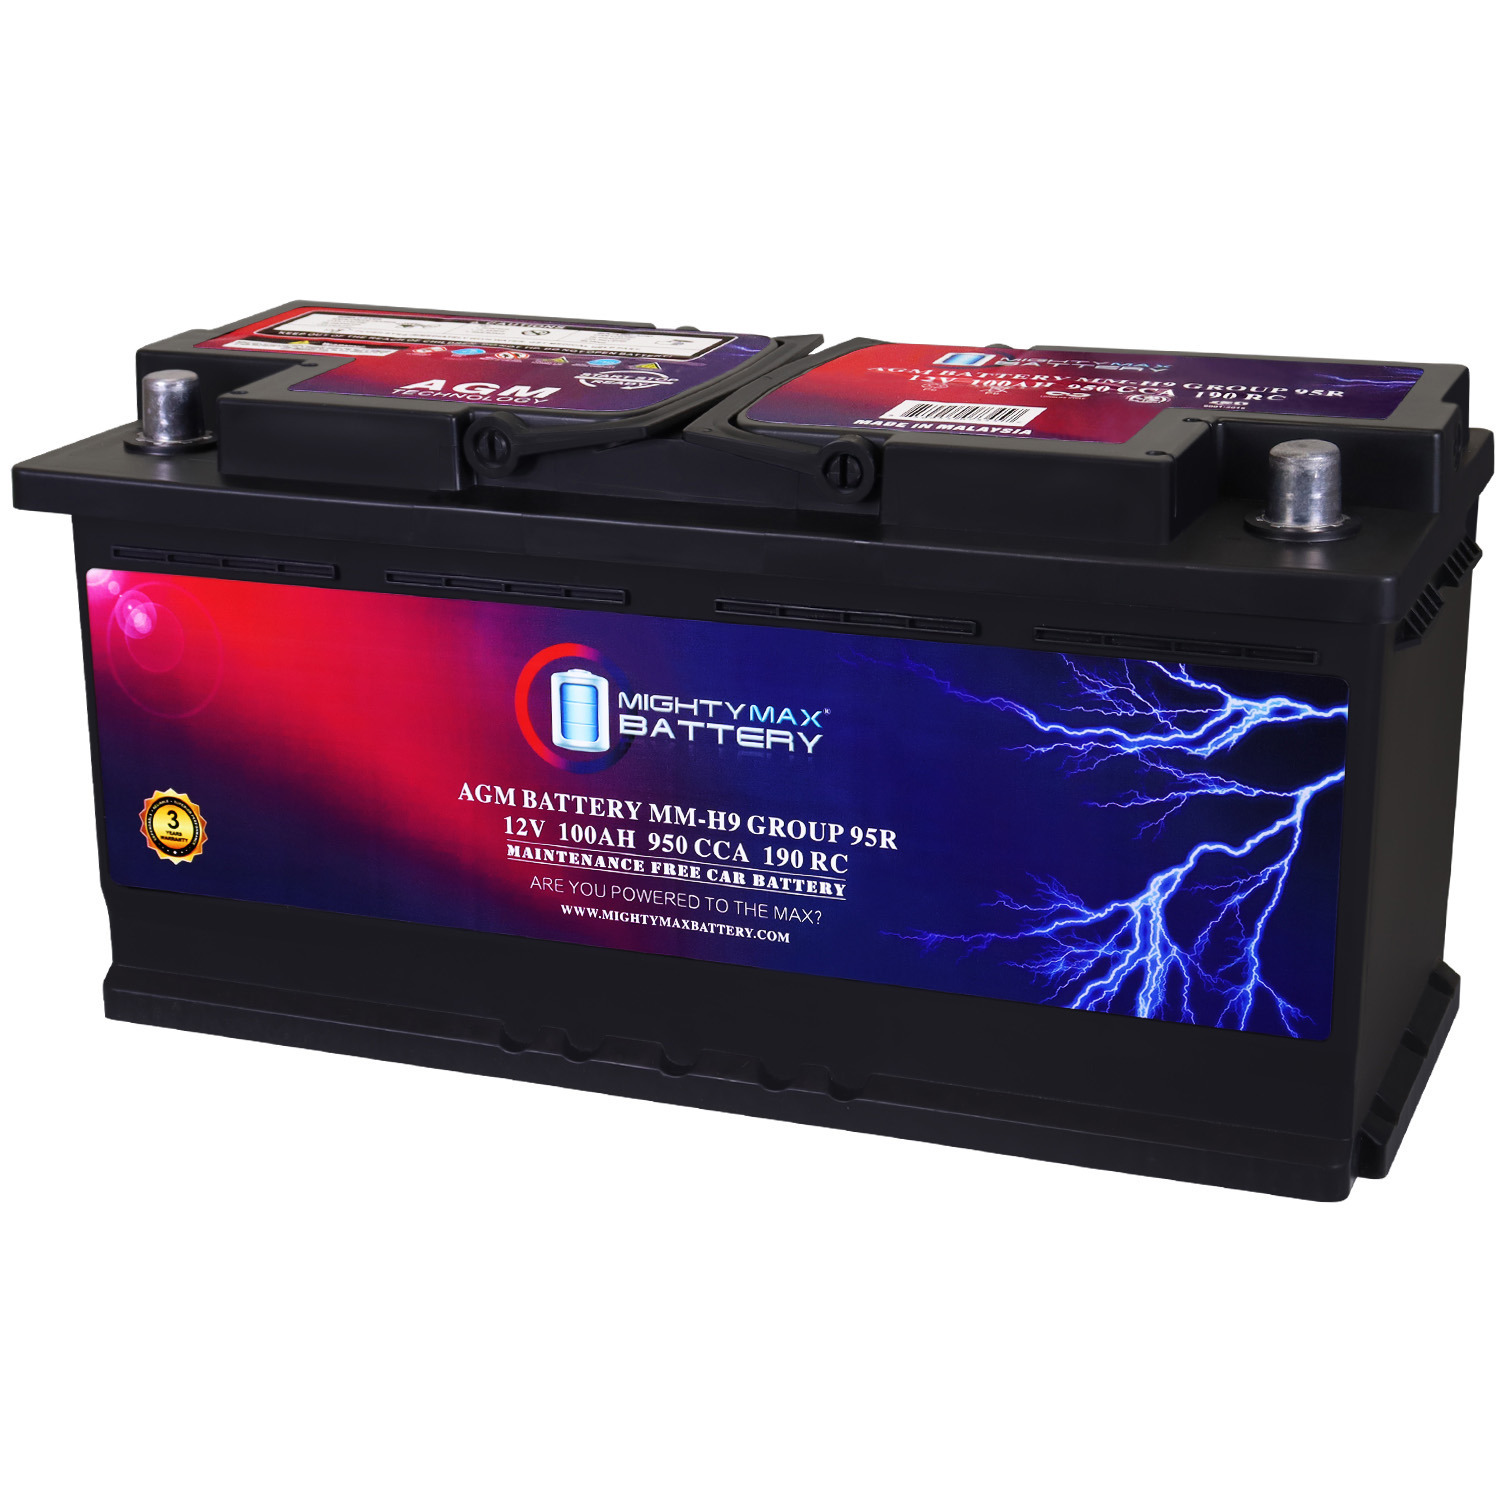 Mighty Max Battery MM-H9 Start and Stop Car Group 95R 12V 100AH, 190RC, 950CCA Rechargeable AGM Car battery